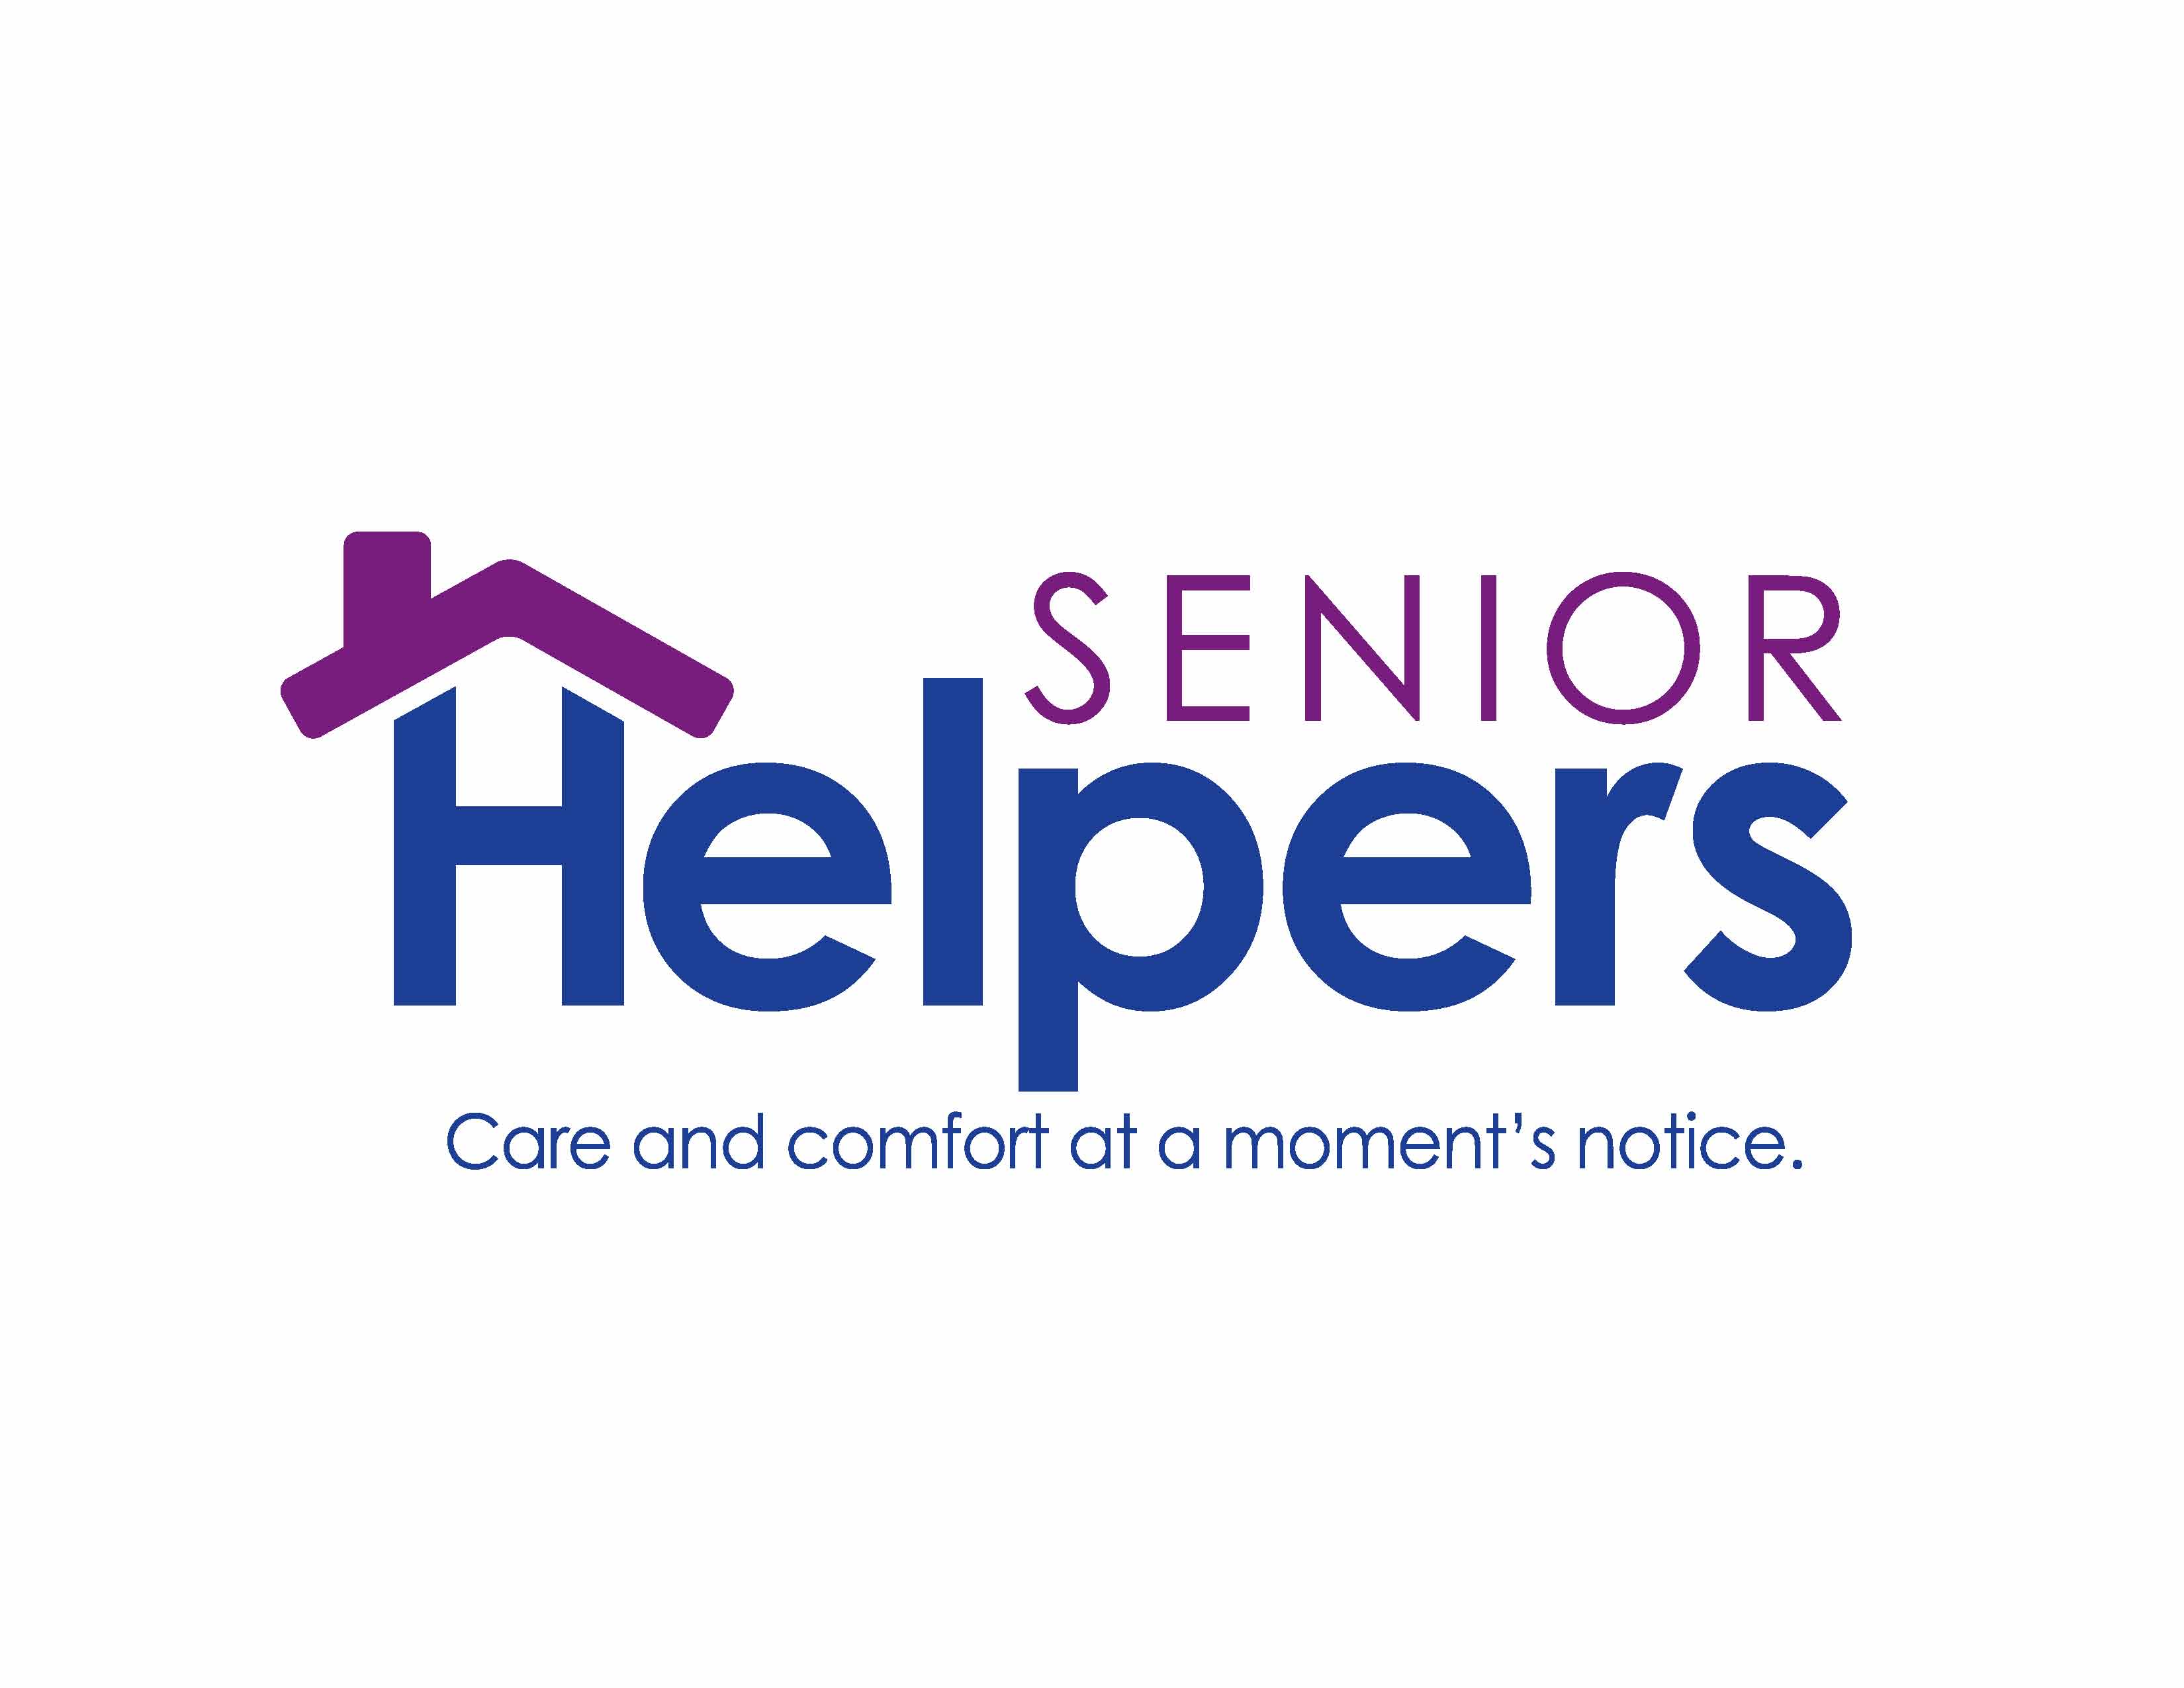 In Home Senior Care Services Vancouver, Home Health Care Assistance